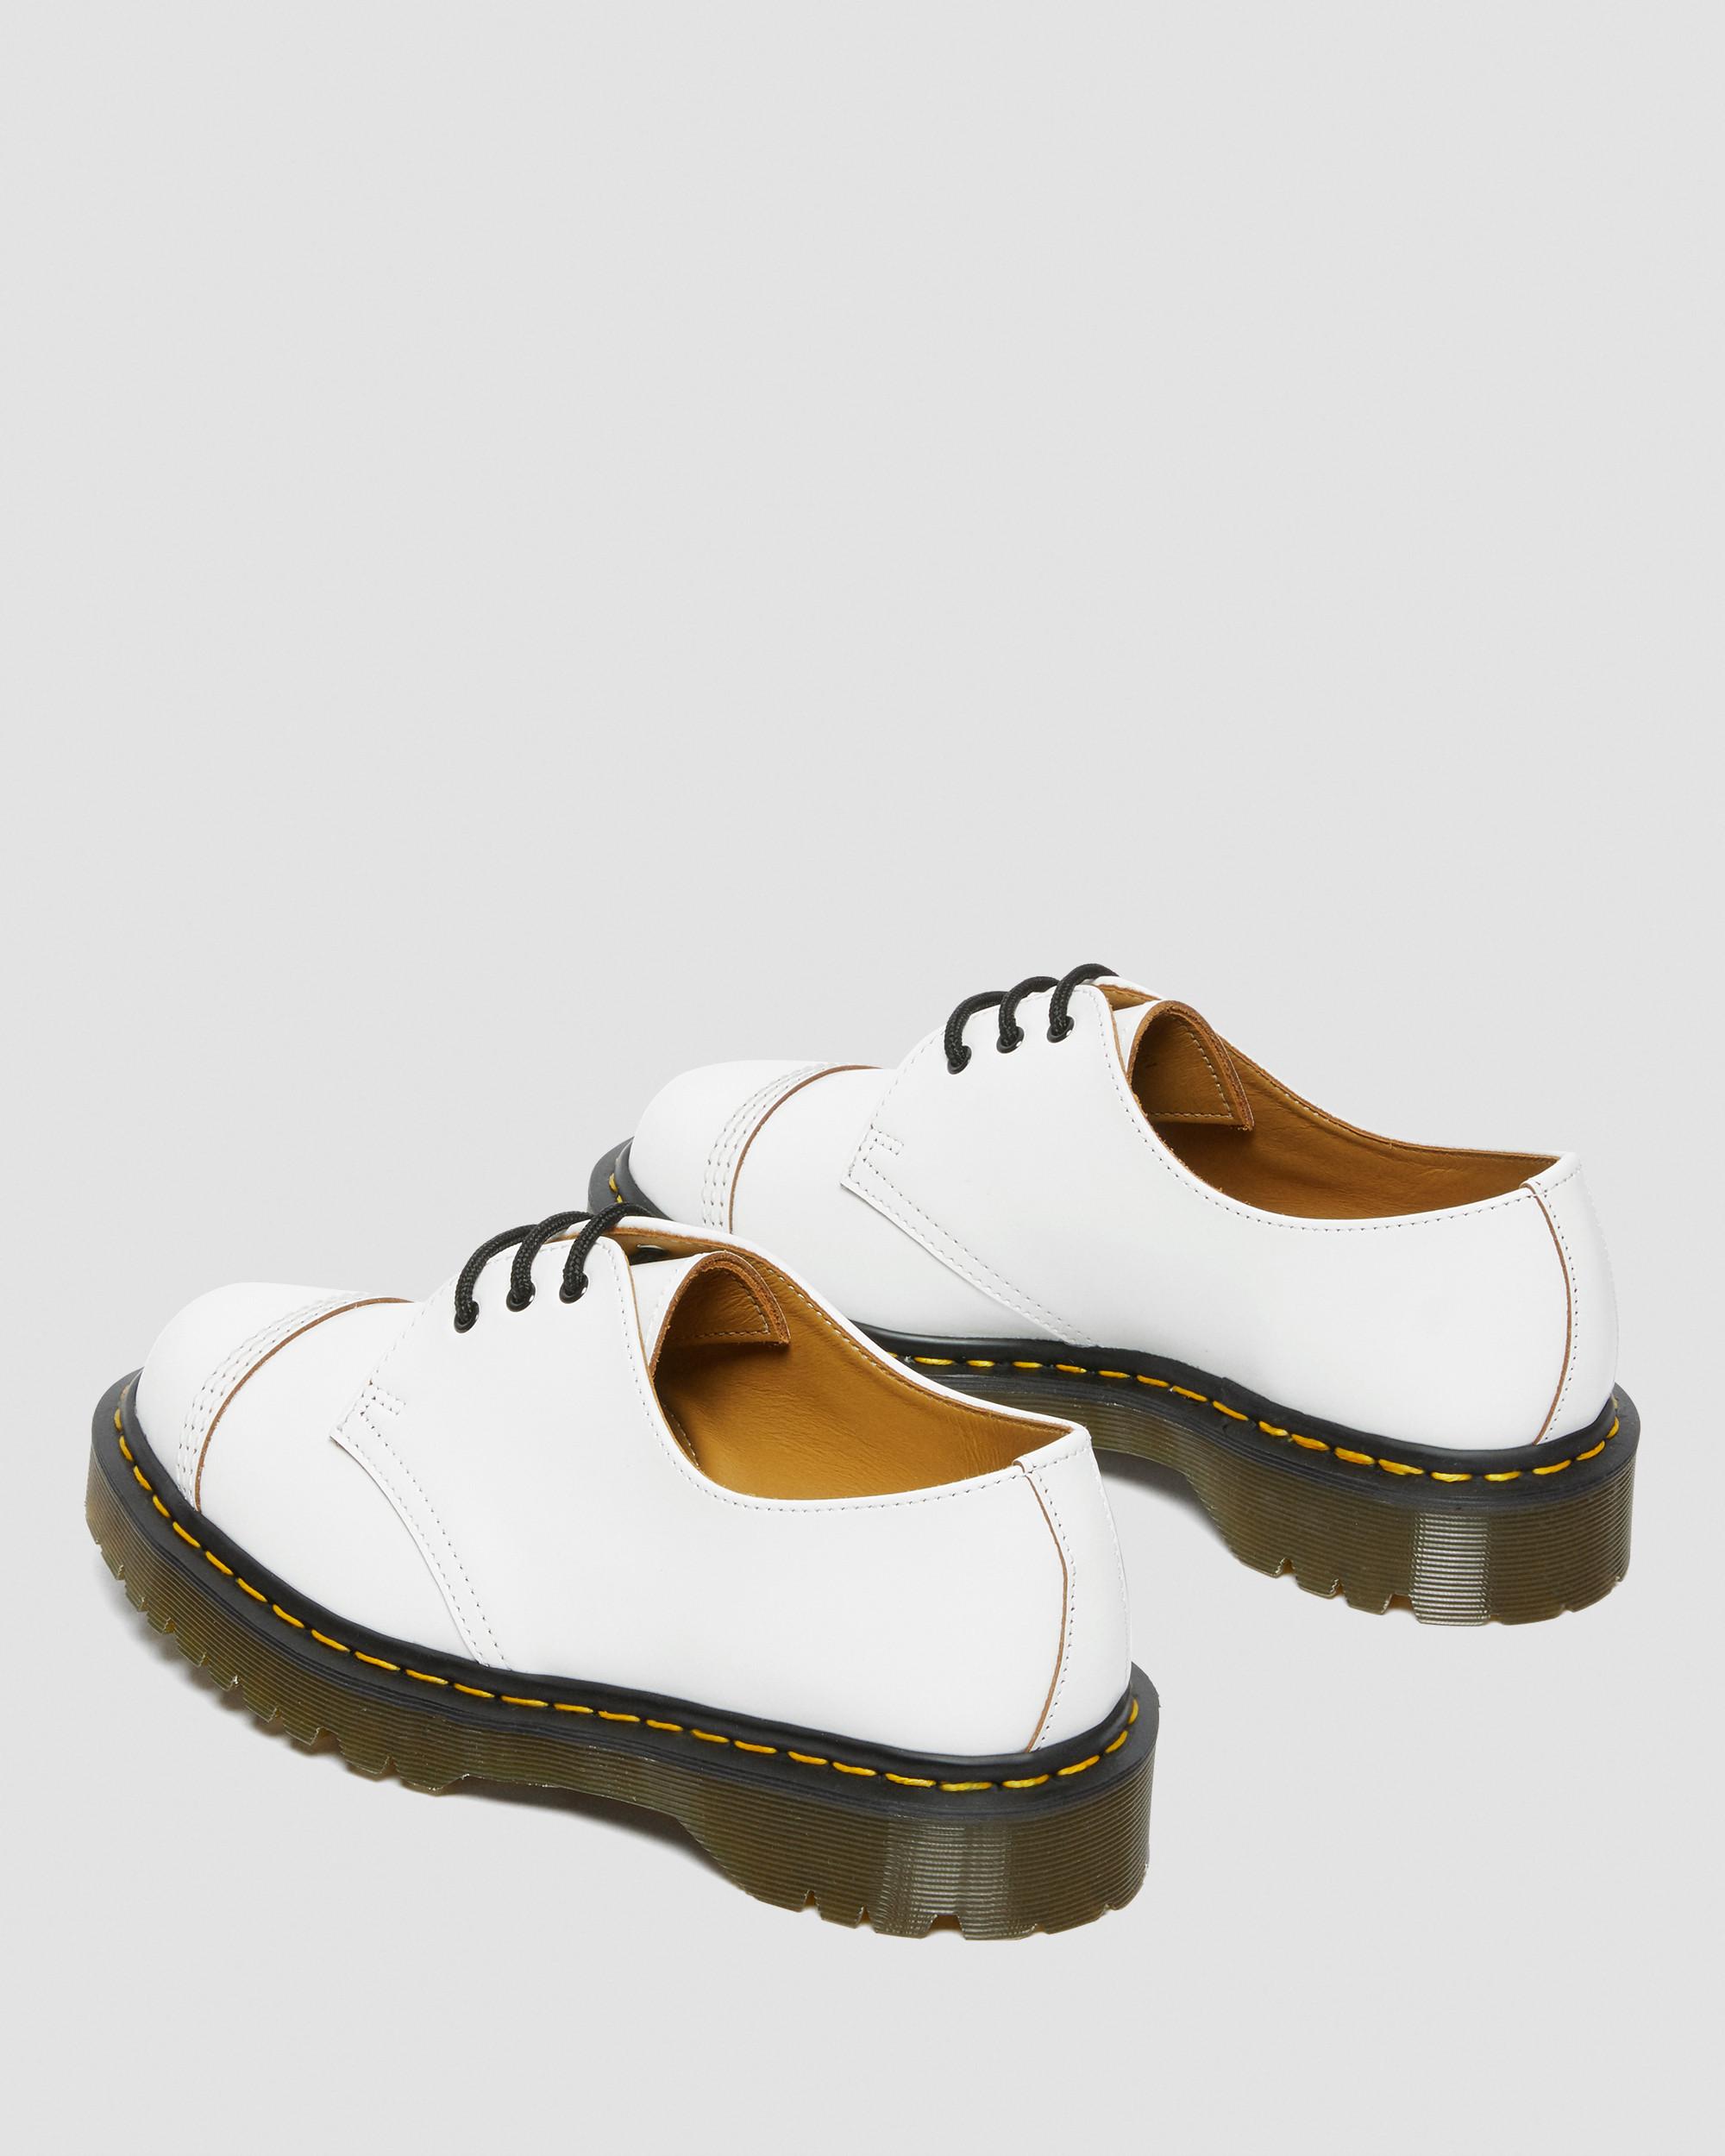 1461 Bex Made in England Toe Cap Oxford Shoes in White